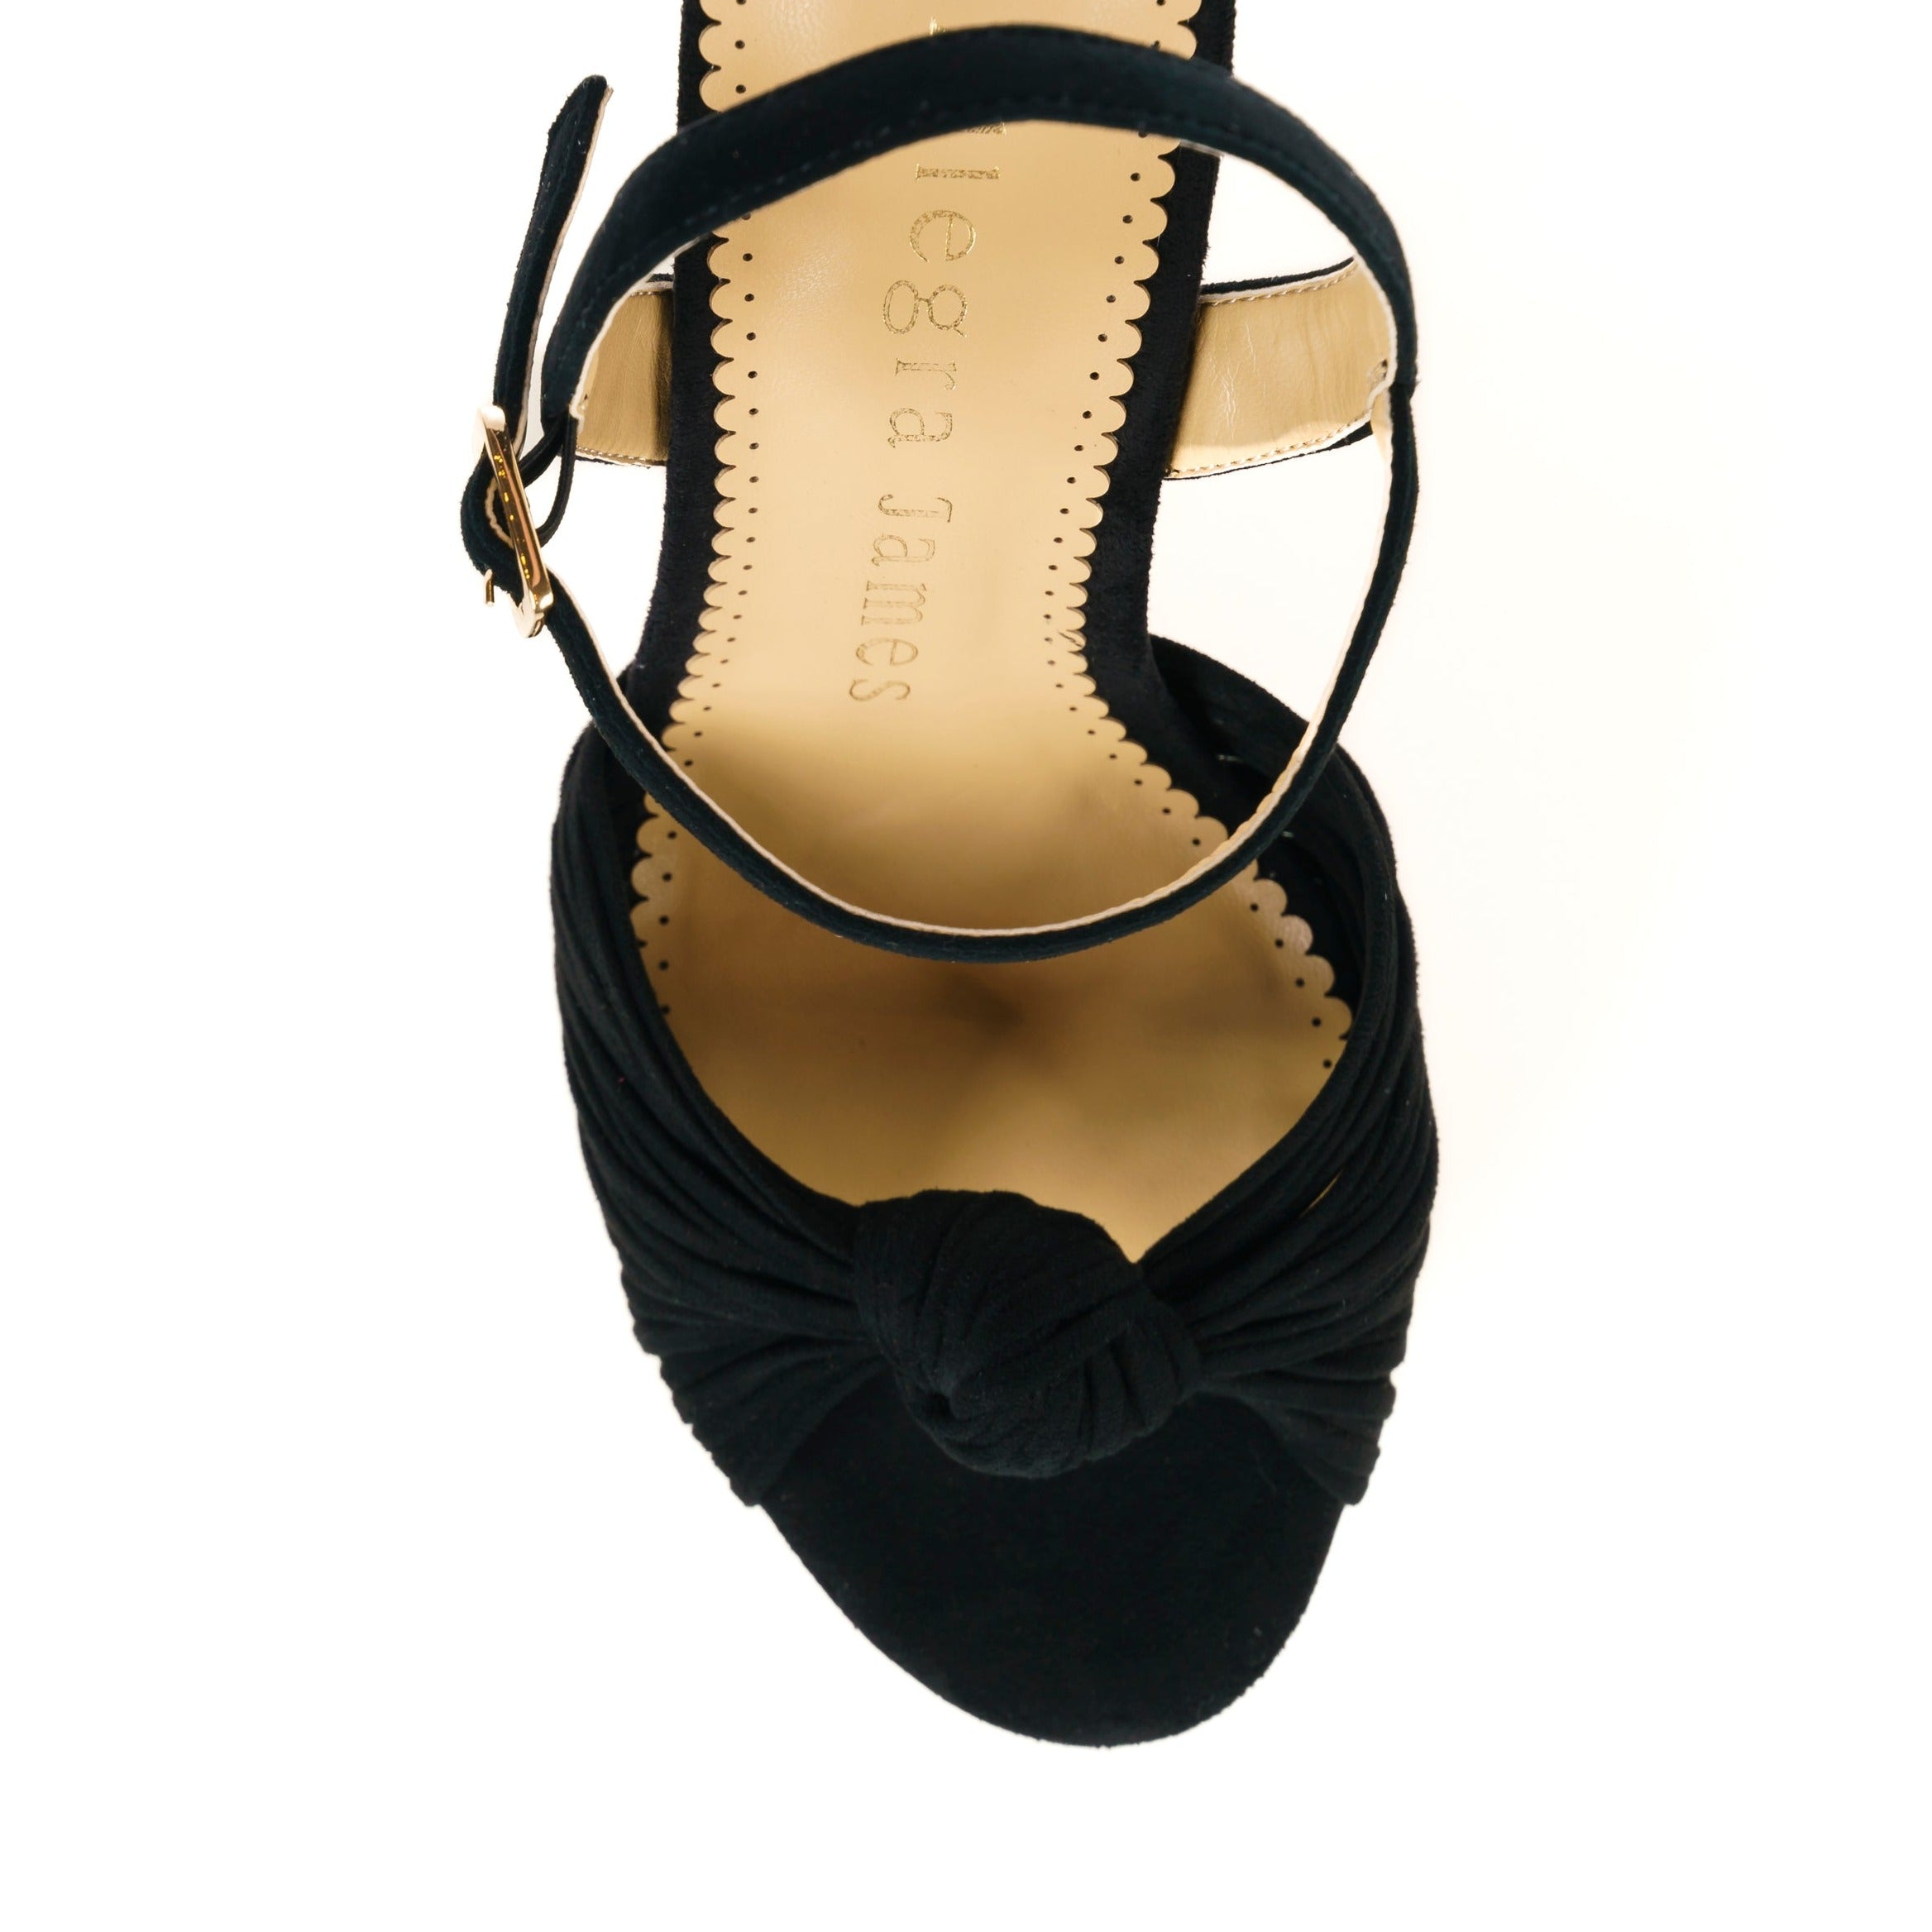 Black platform sandals with ankle buckle closure - top view